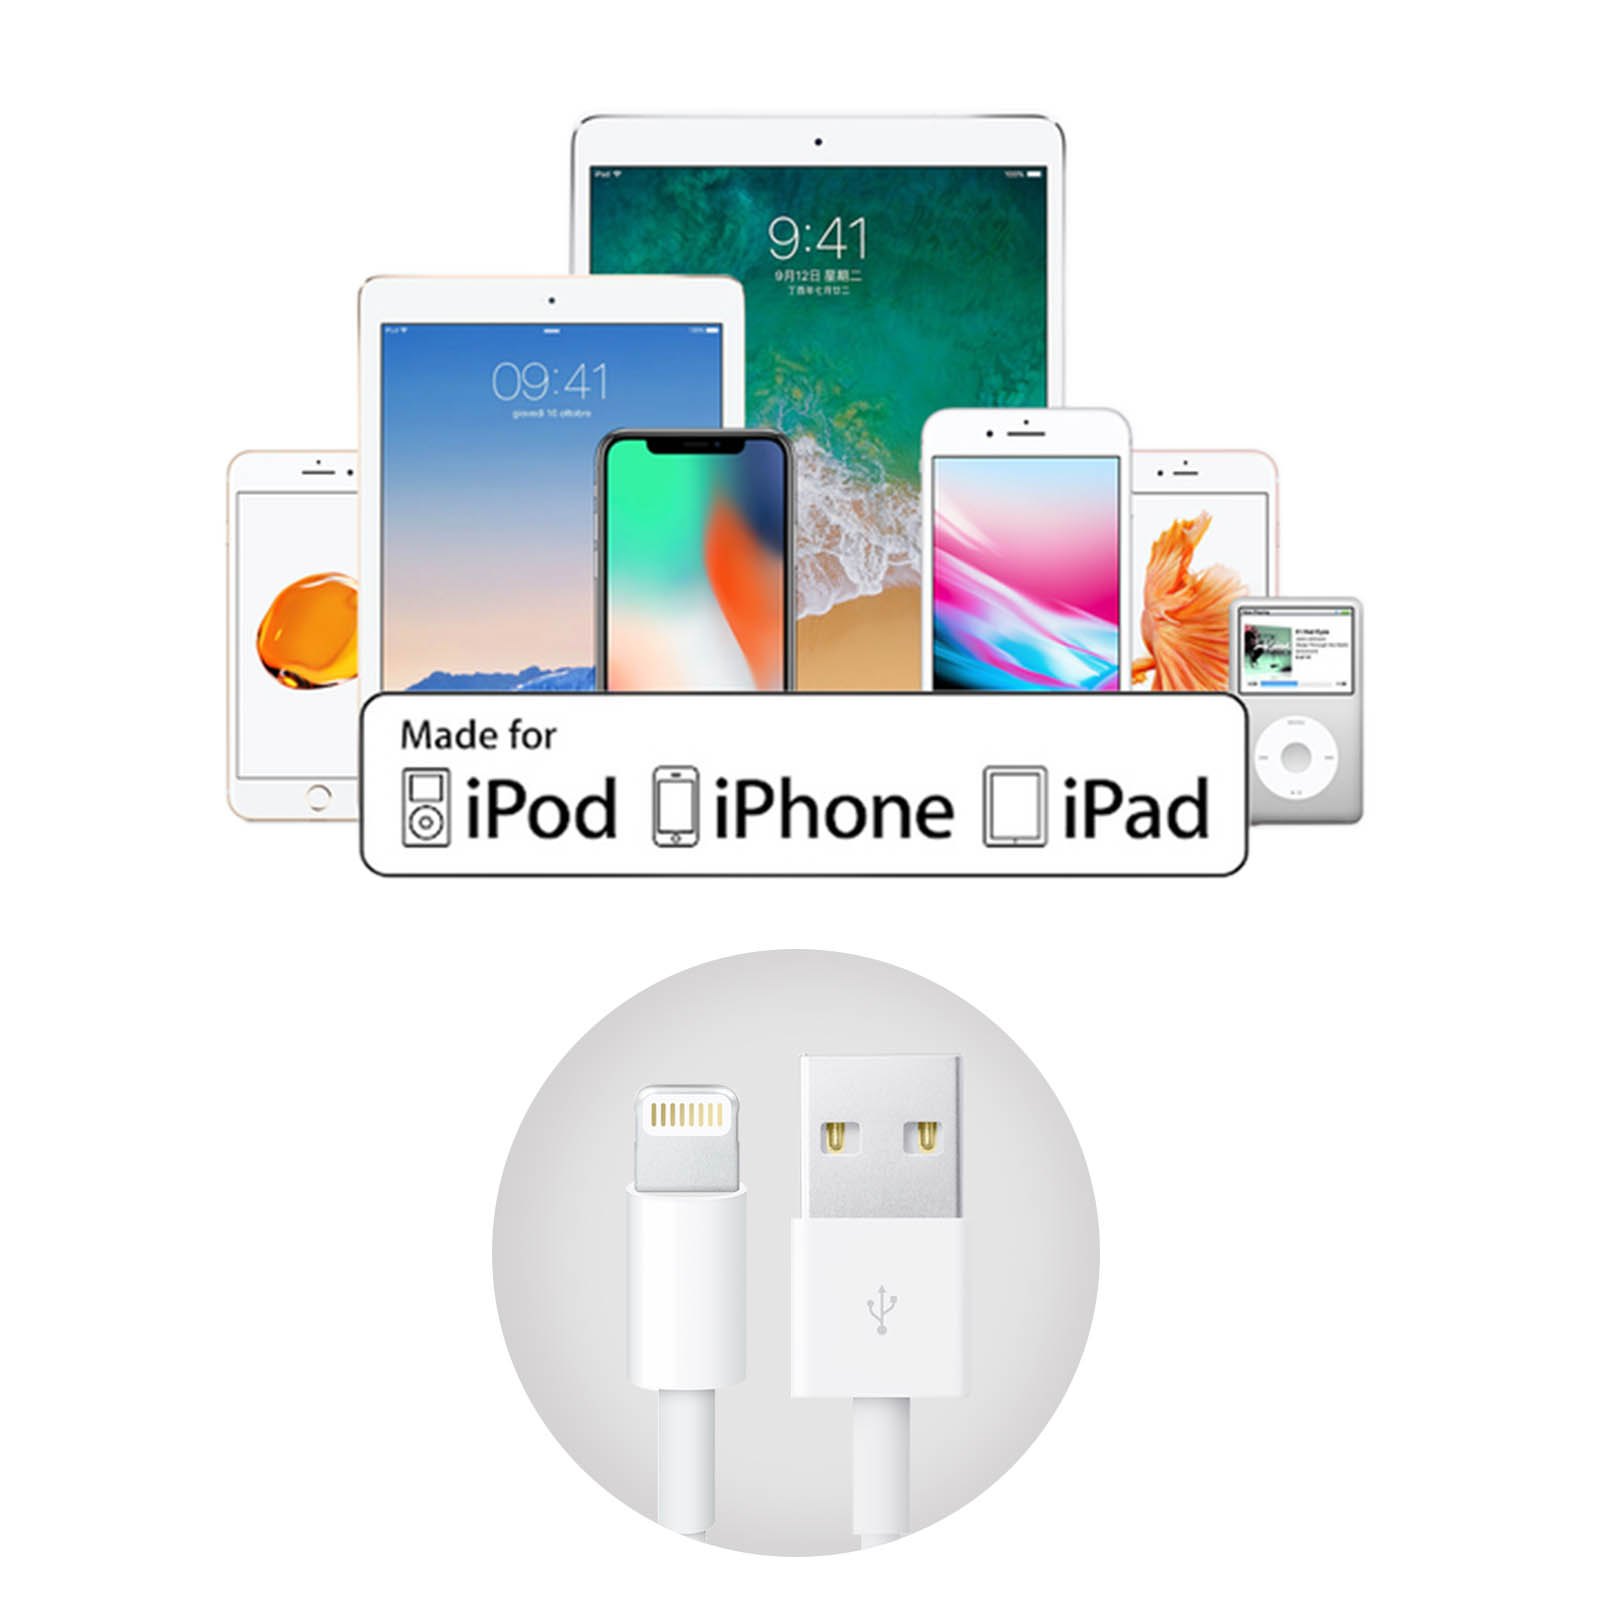 Cable Conector Lightning / USB Apple MD818ZM/A para iPhone, iPad, iPod -  Blanco